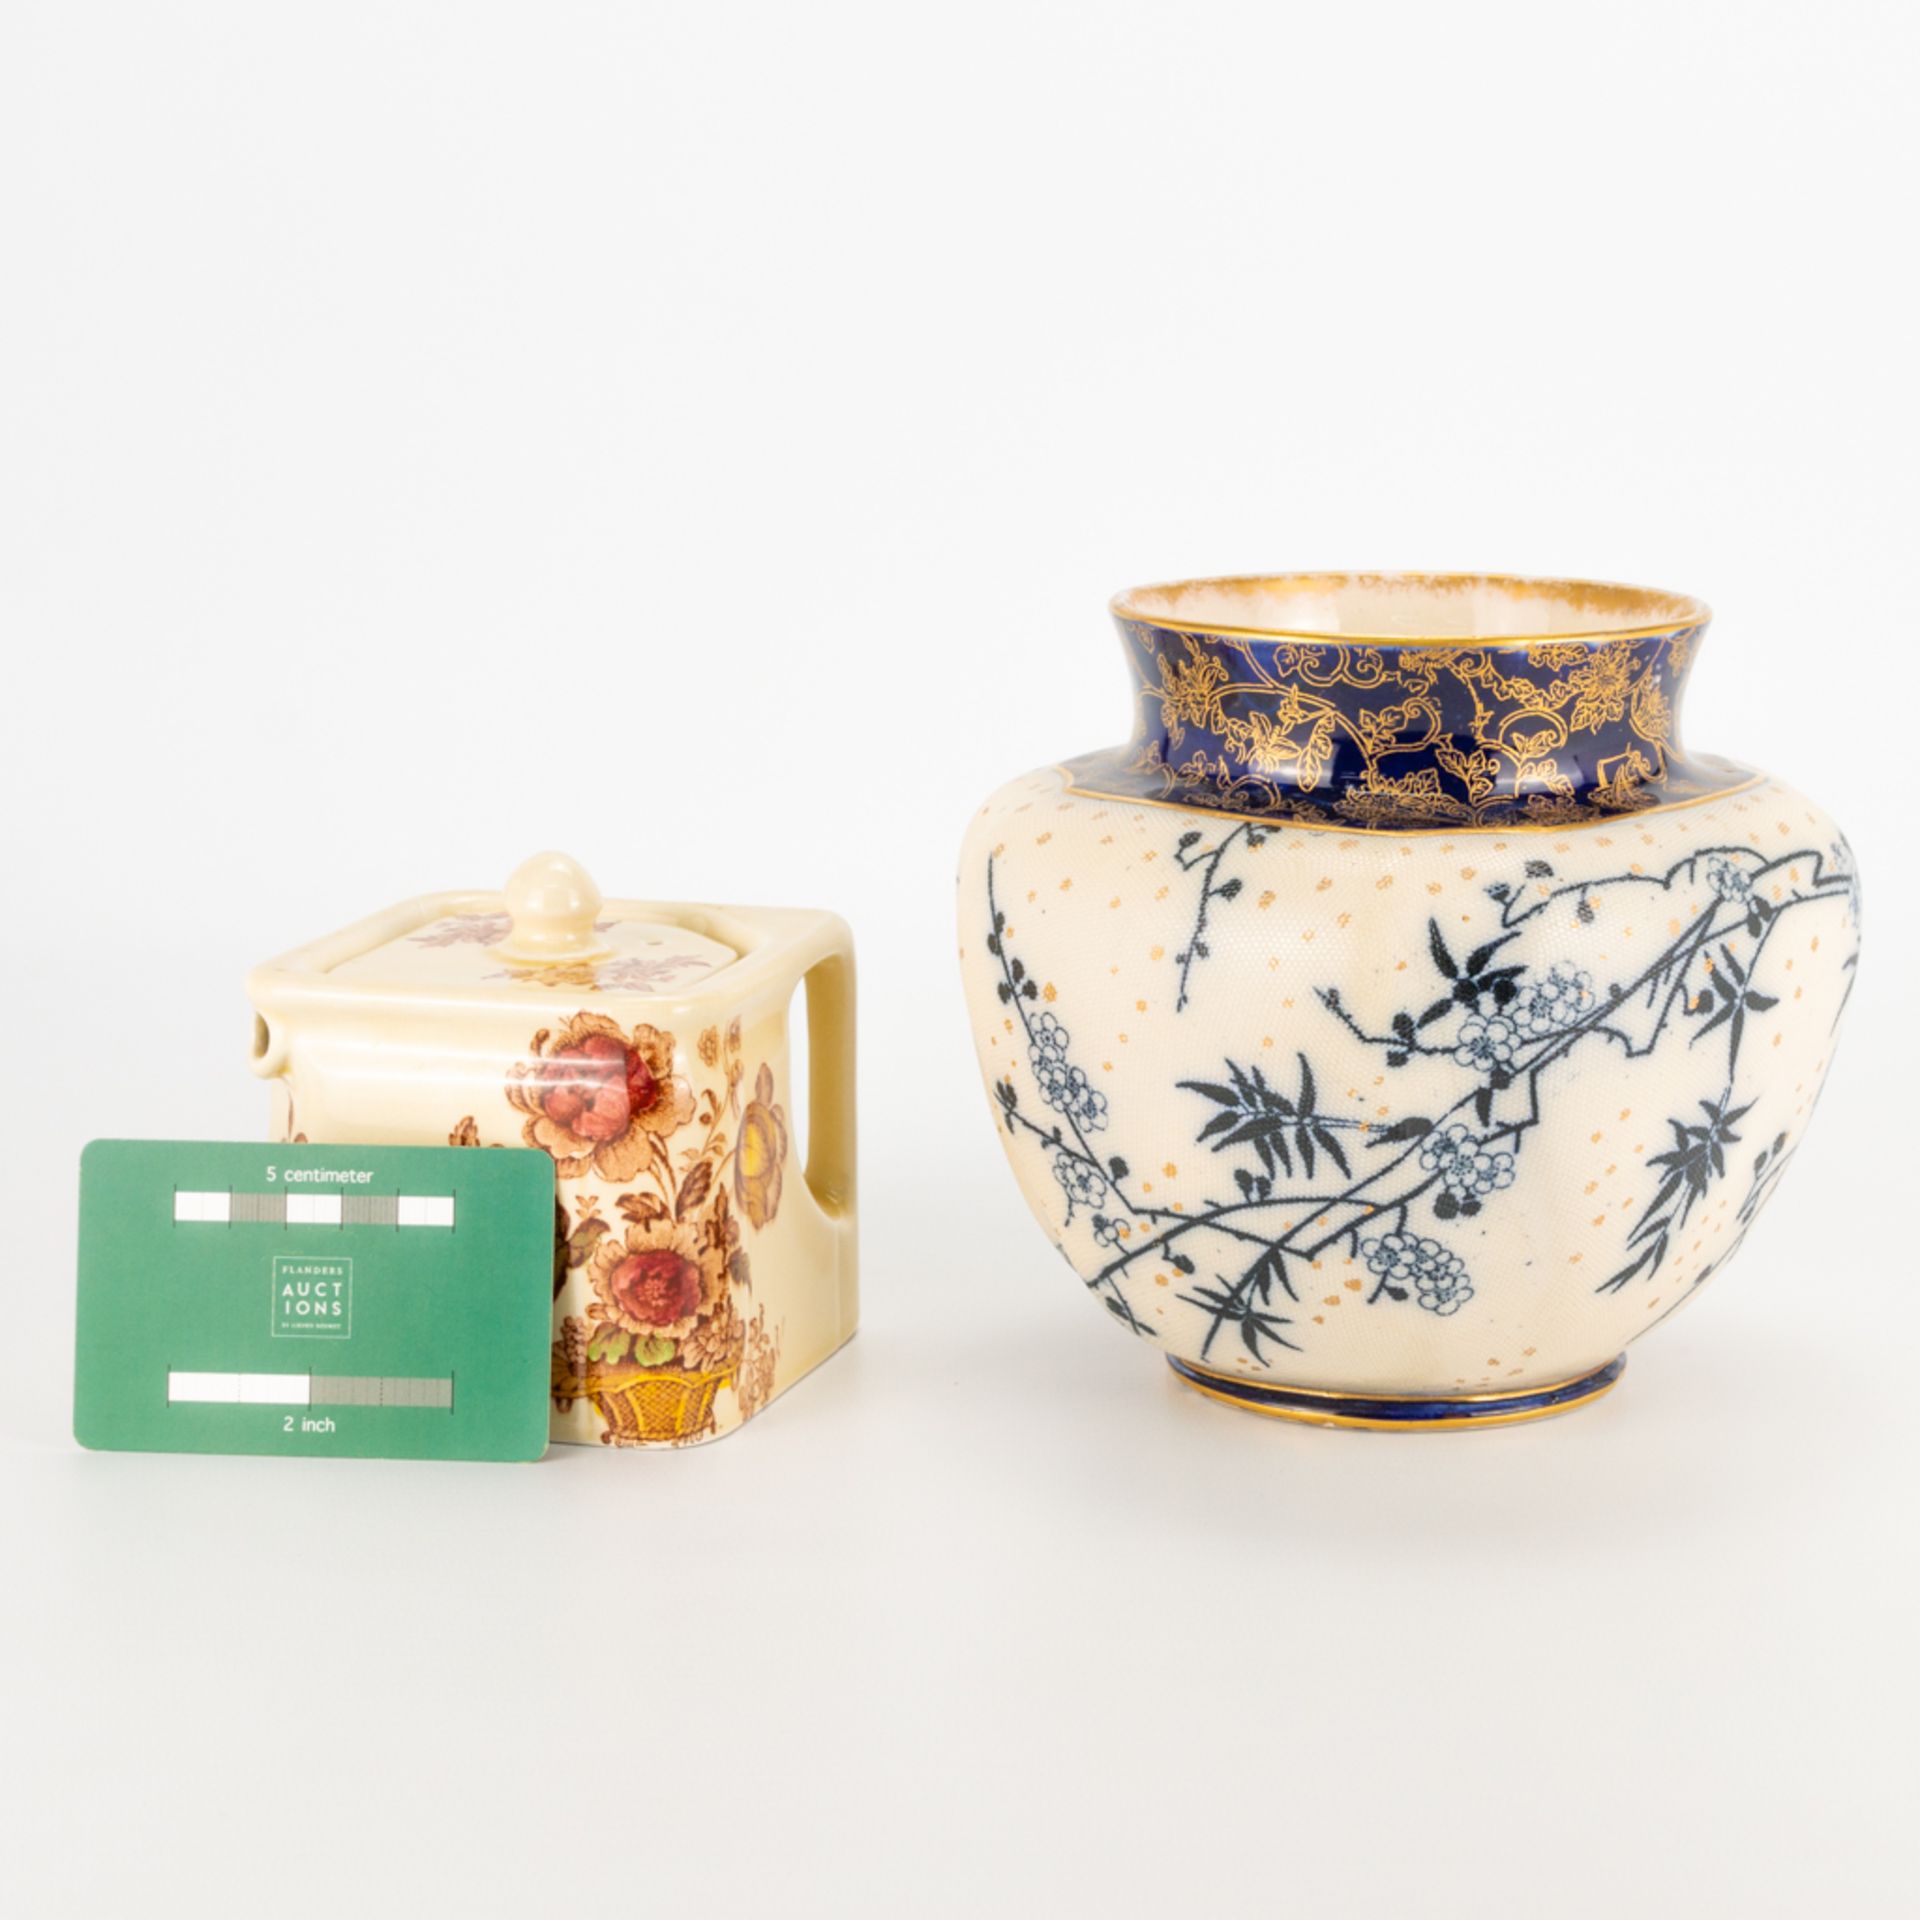 A collection of 2 pieces of English porcelain, a vase made by Doulton and a tea pot made by Clarice - Image 3 of 17